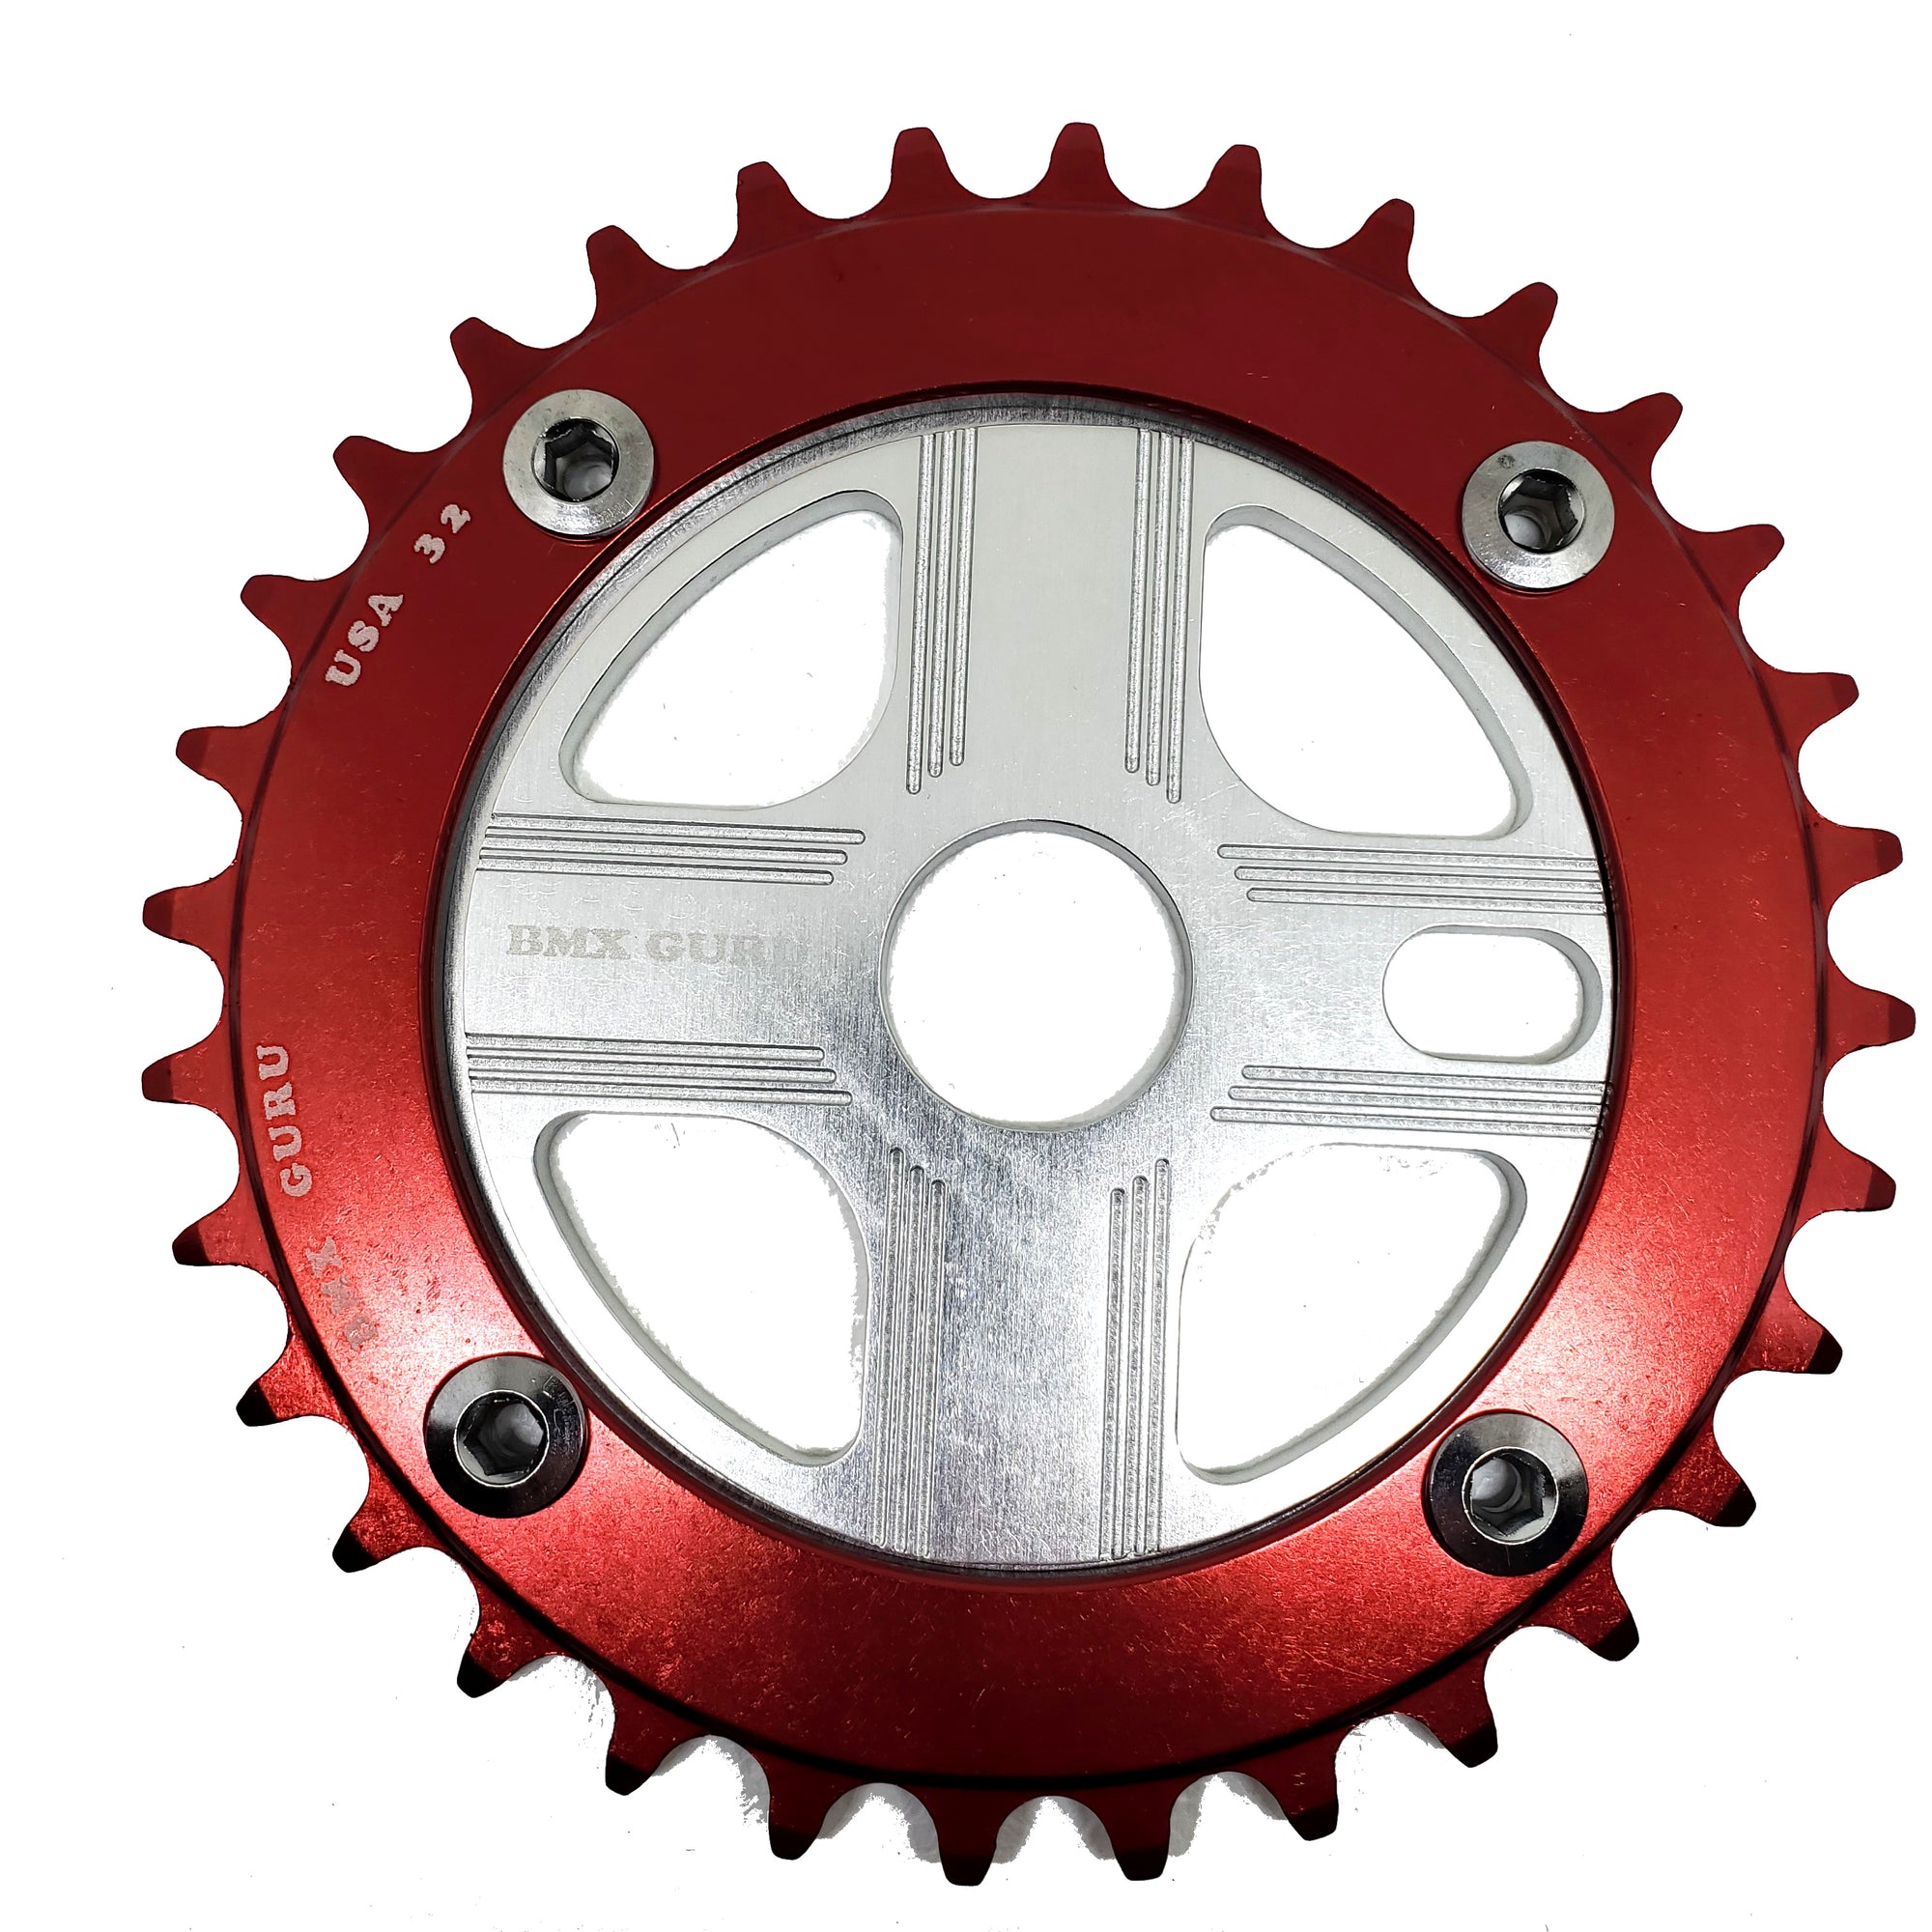 BMXGuru 32T Aluminum Spider & 4-bolt Chainring Combo - Red over Silver - USA Made